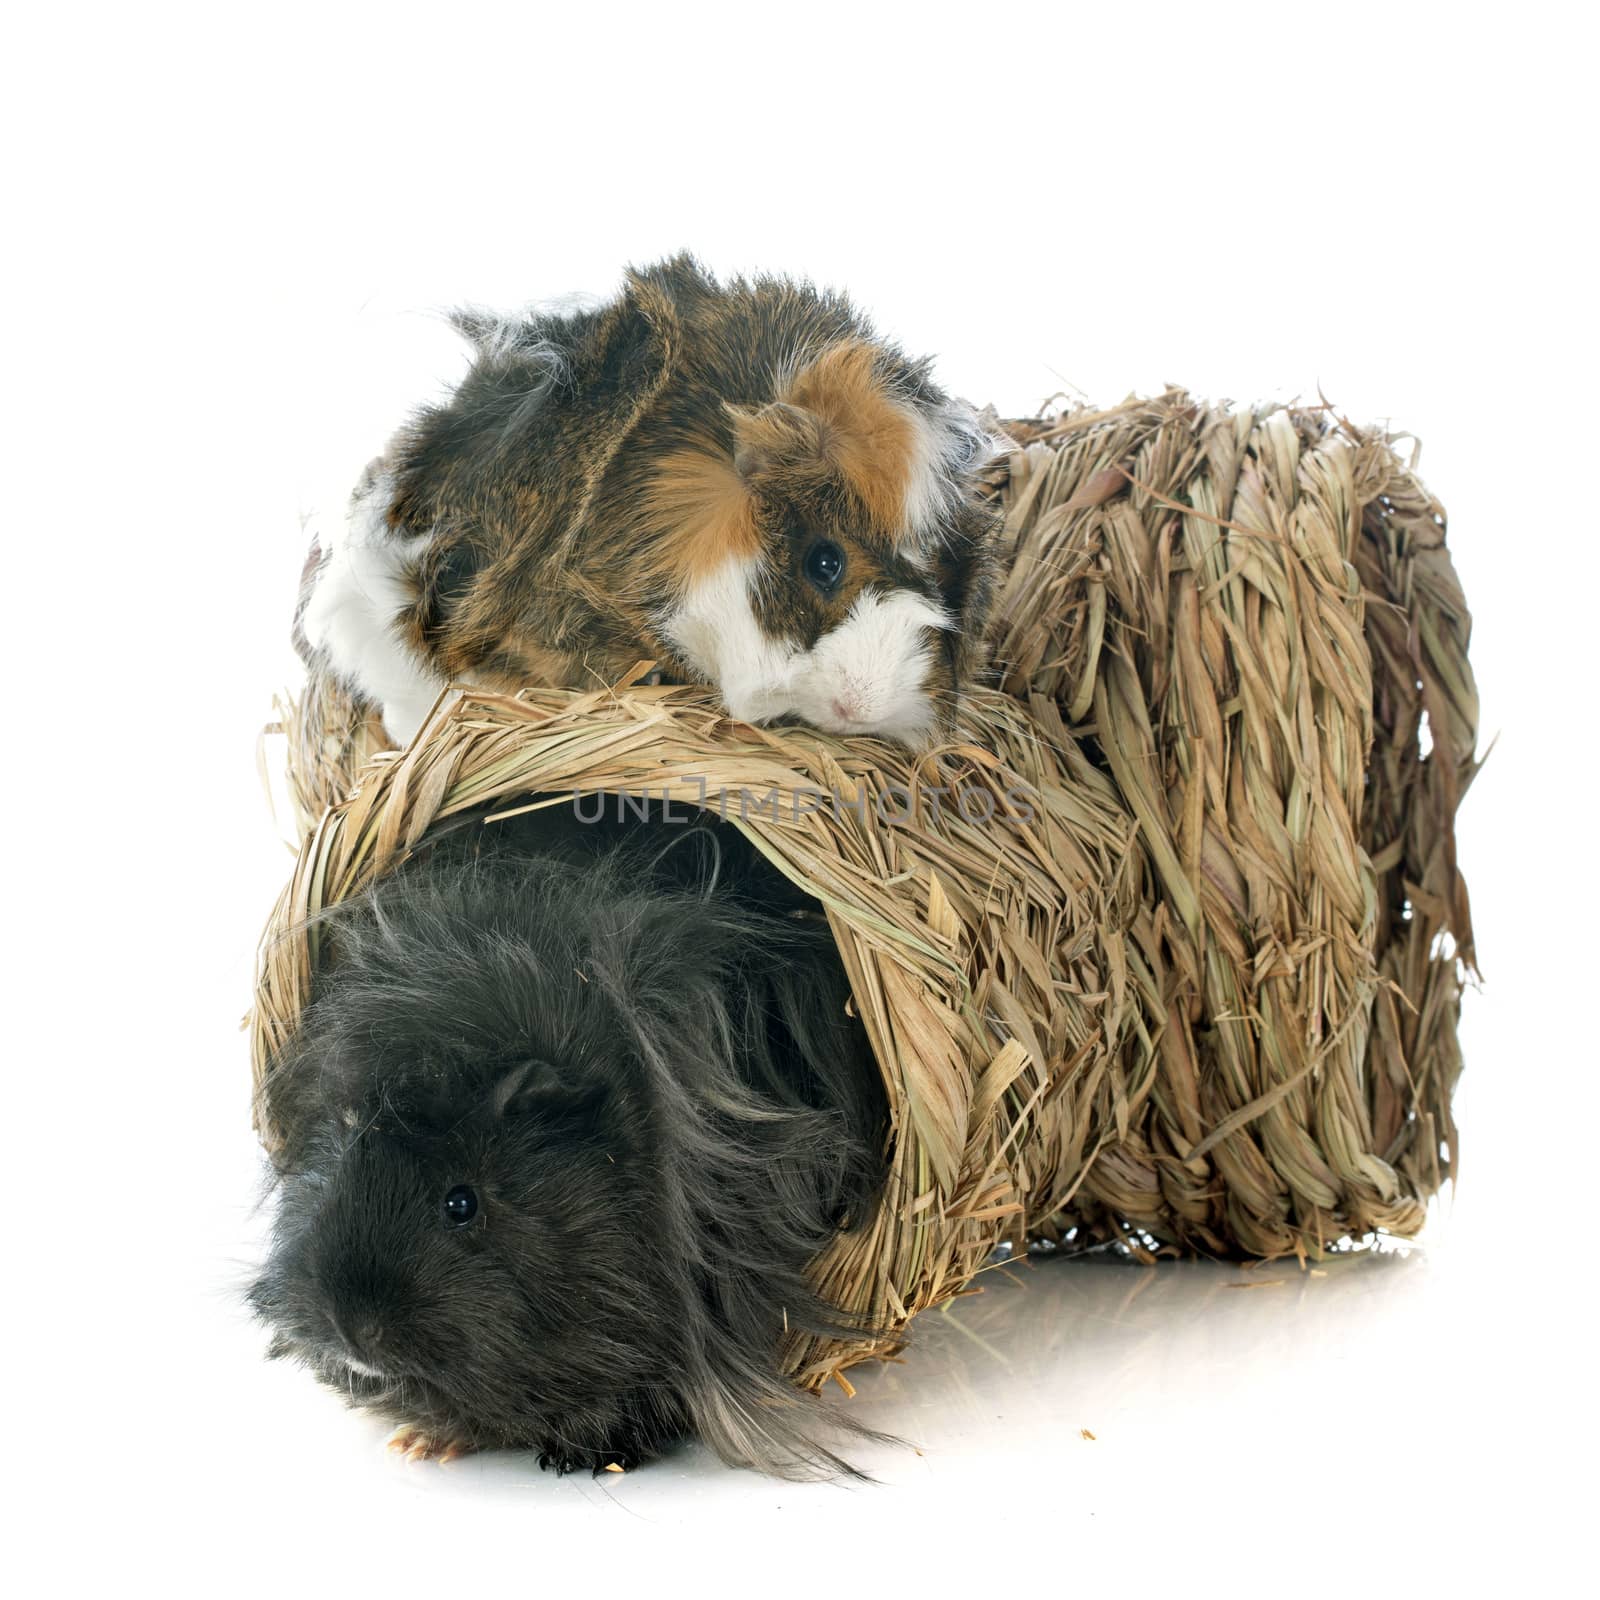 guineal pigs in front of white background